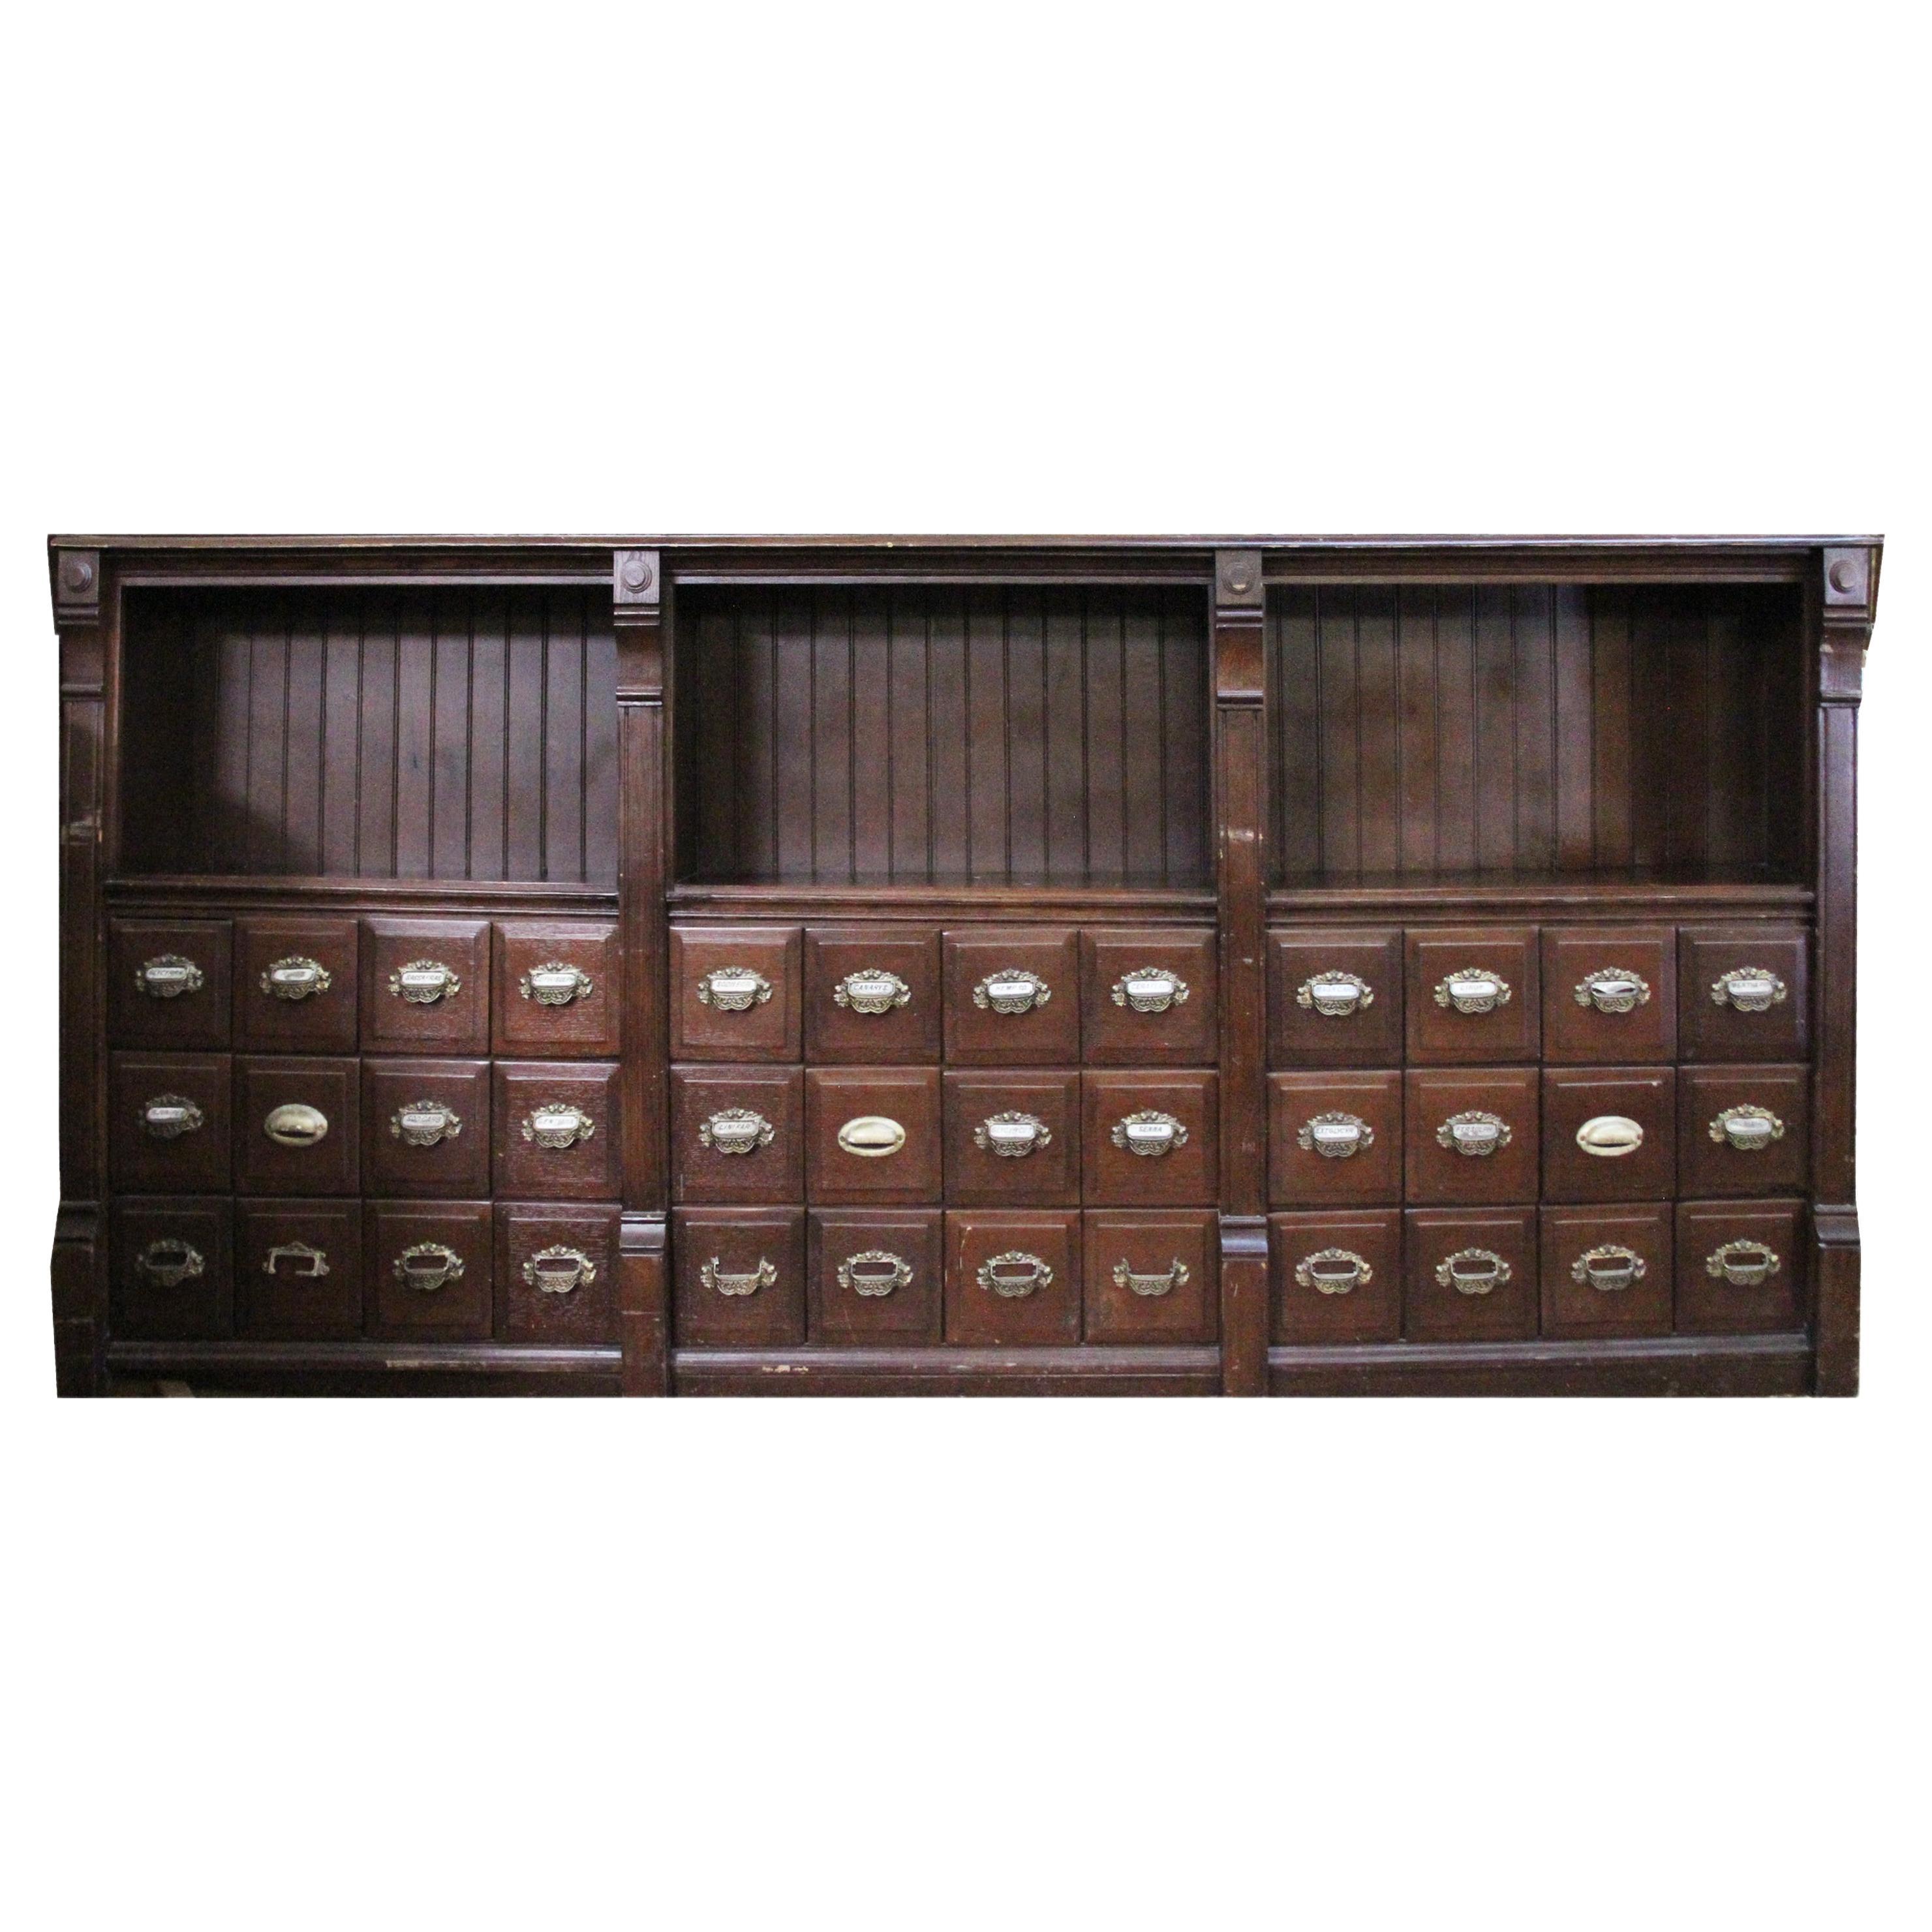 9FT Antique Apothecary cabinet

Fantastic cabinet from a Texas University Pharmacy College. One piece with 3 sections and 36 drawers. Hand carved details. Retains original category labeling with beautiful brass pulls. The top features open shelving